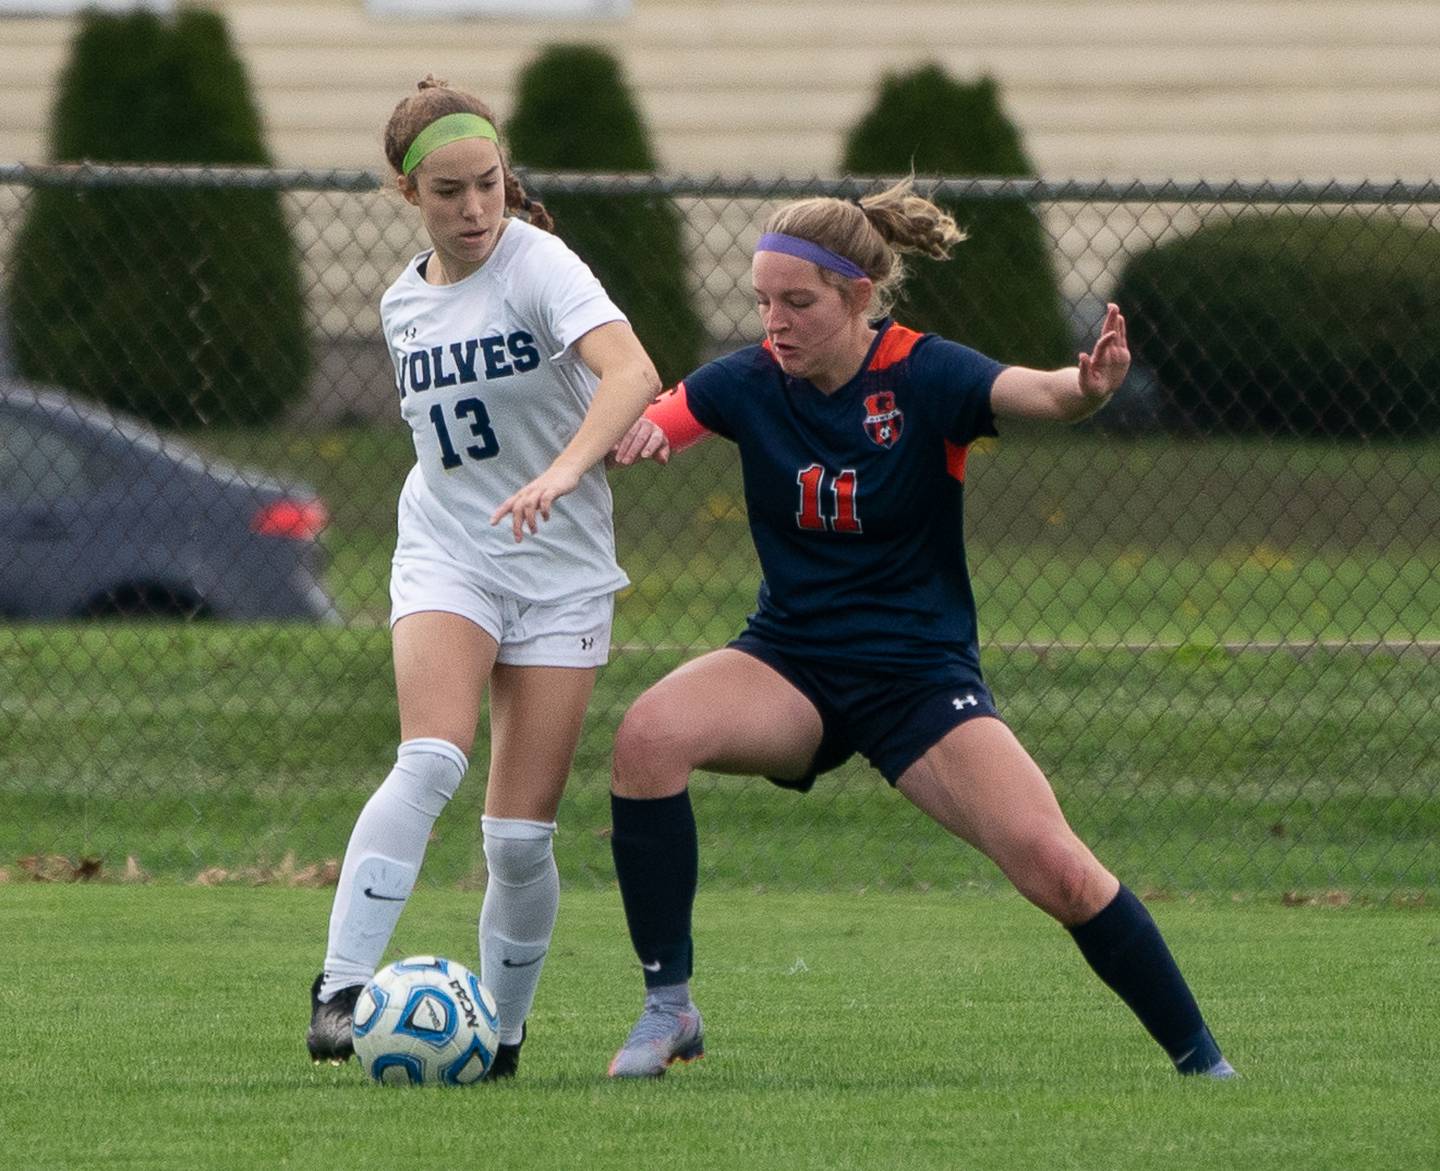 Oswego East's Riley Gumm (13) plays the ball against Oswego’s Elaina Hallick (11) during a soccer match at Oswego High School on Monday, May 2, 2022.